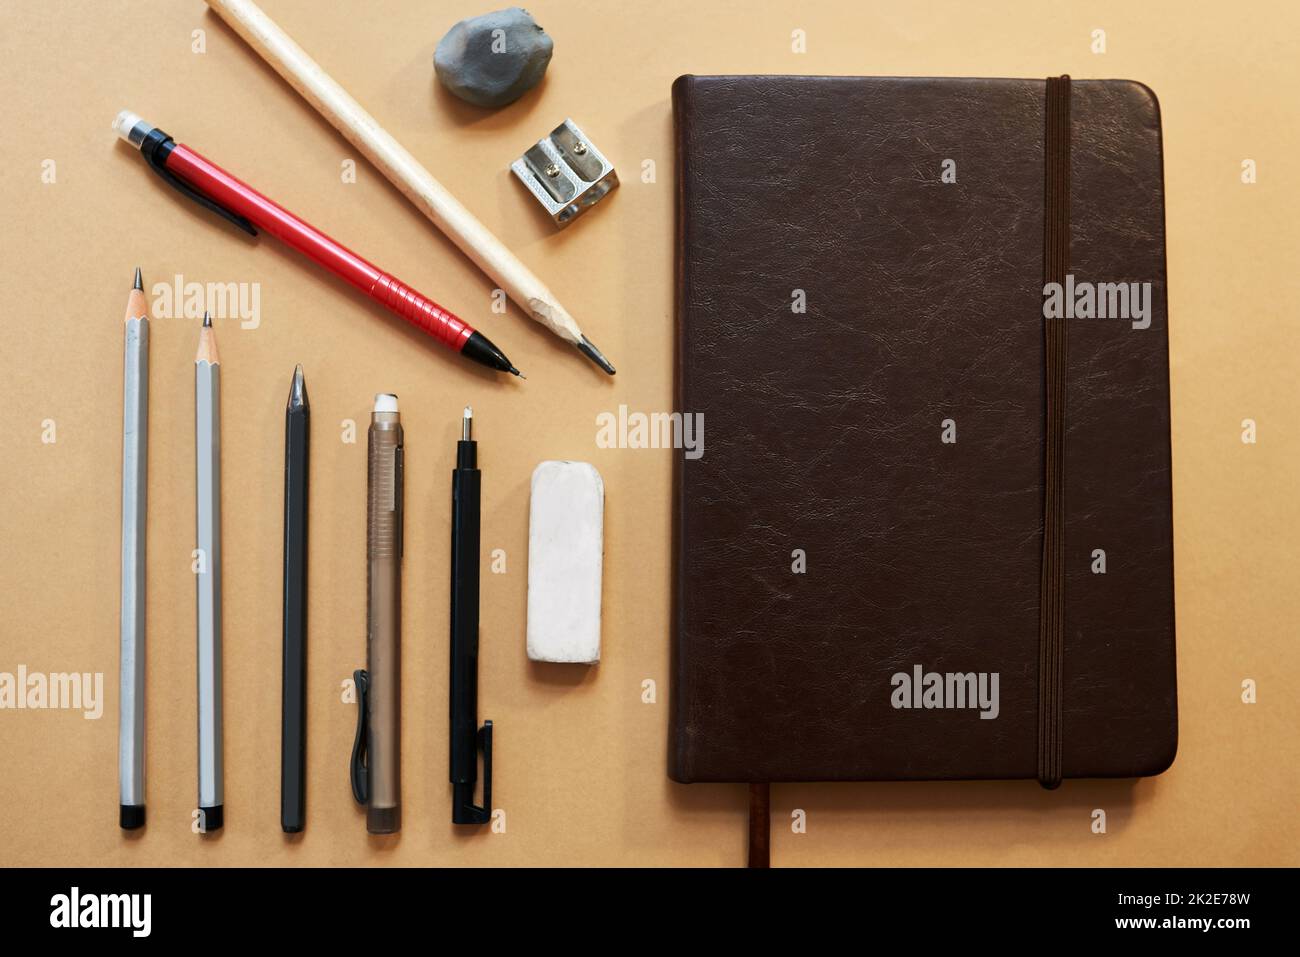 Give your inner artist room to play. Studio shot of a sketchpad and other various artistic against a brown background. Stock Photo